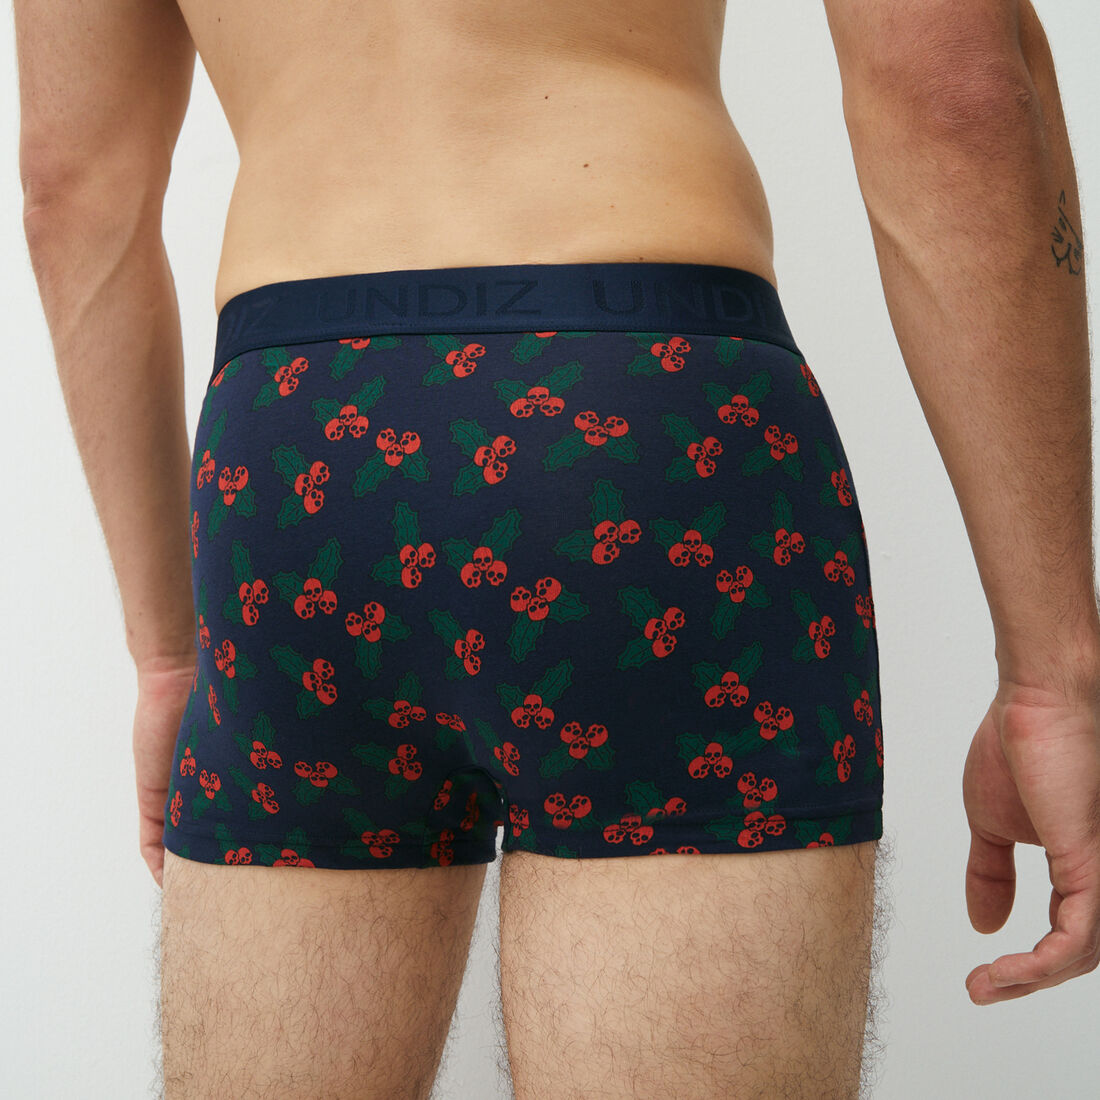 boxers with holly pattern;